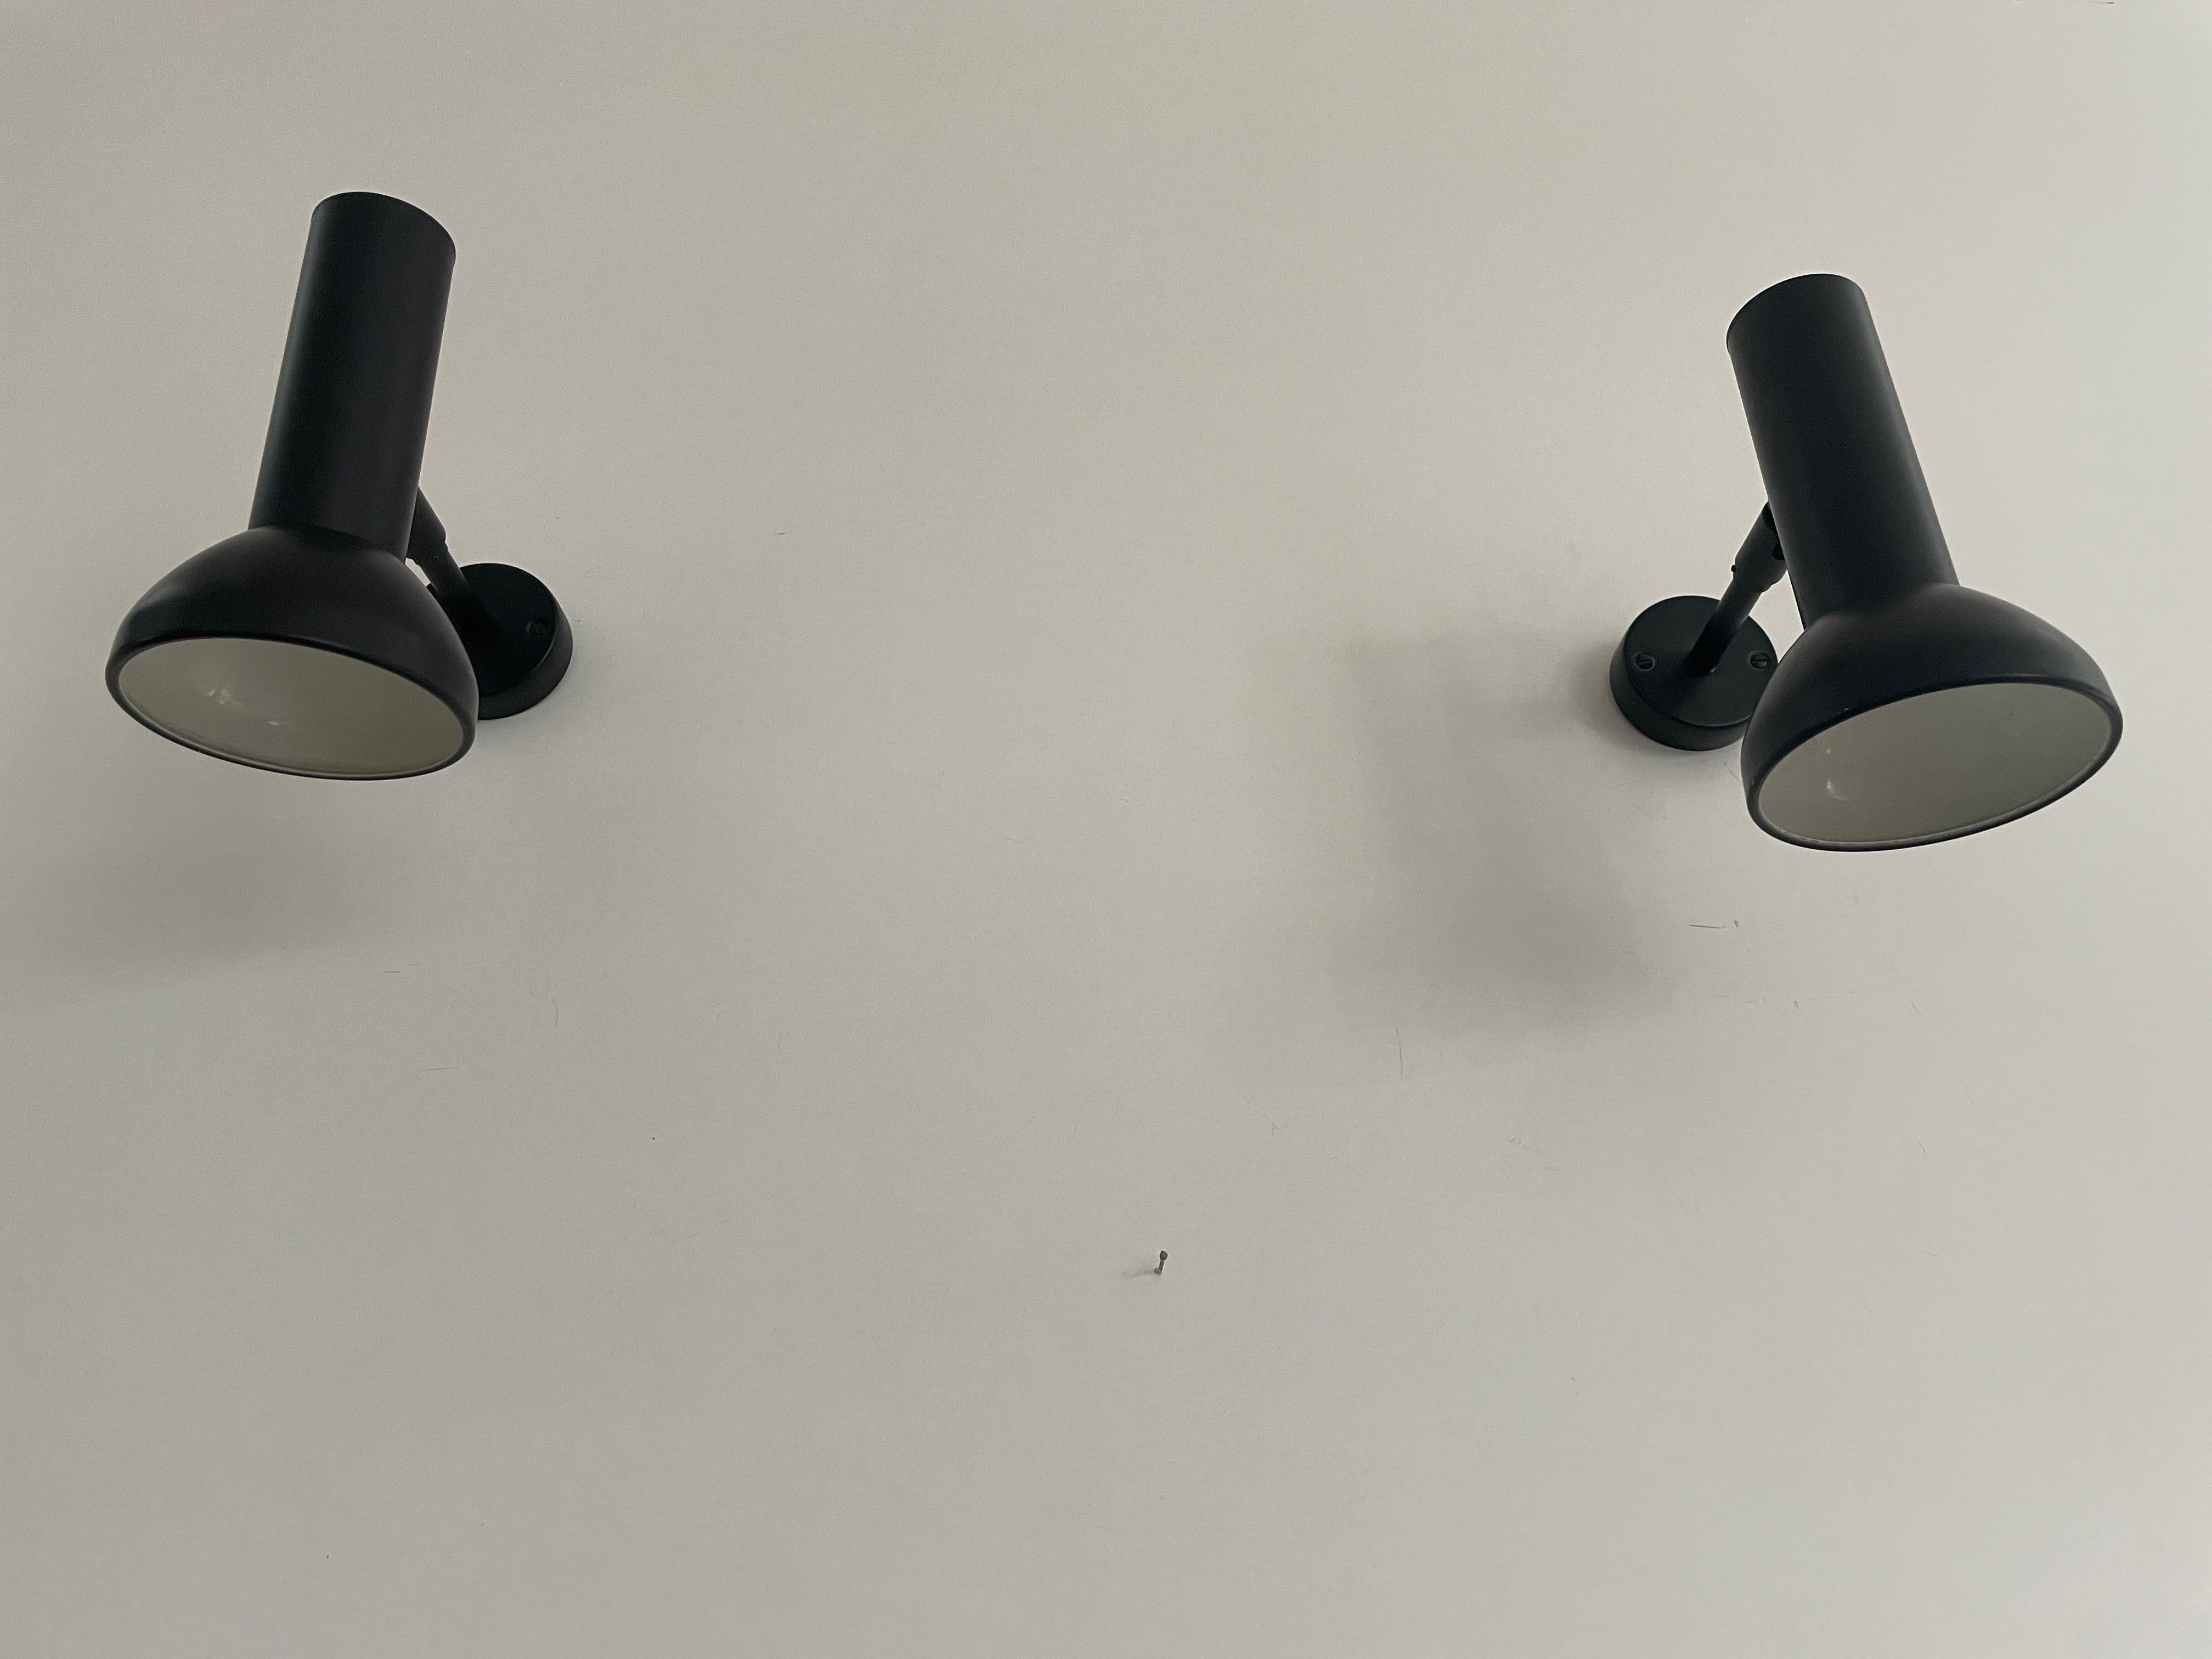 Metal Mid-century Modern Black Pair of Sconces by Cosack Leuchten, 1960s, Germany For Sale